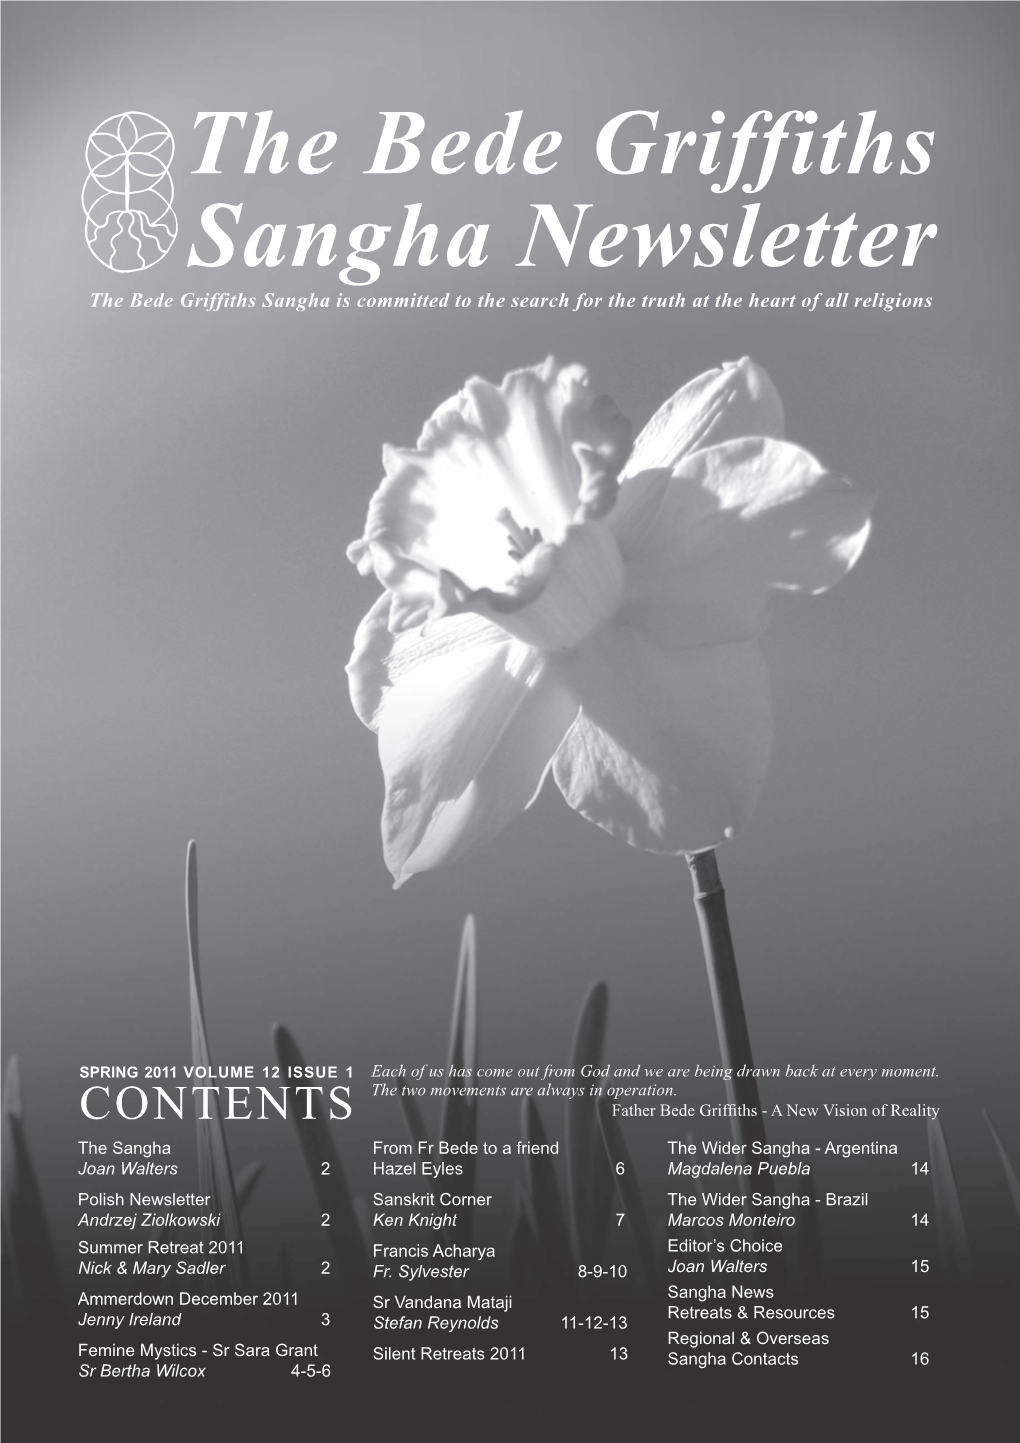 The Bede Griffiths Sangha Newsletter